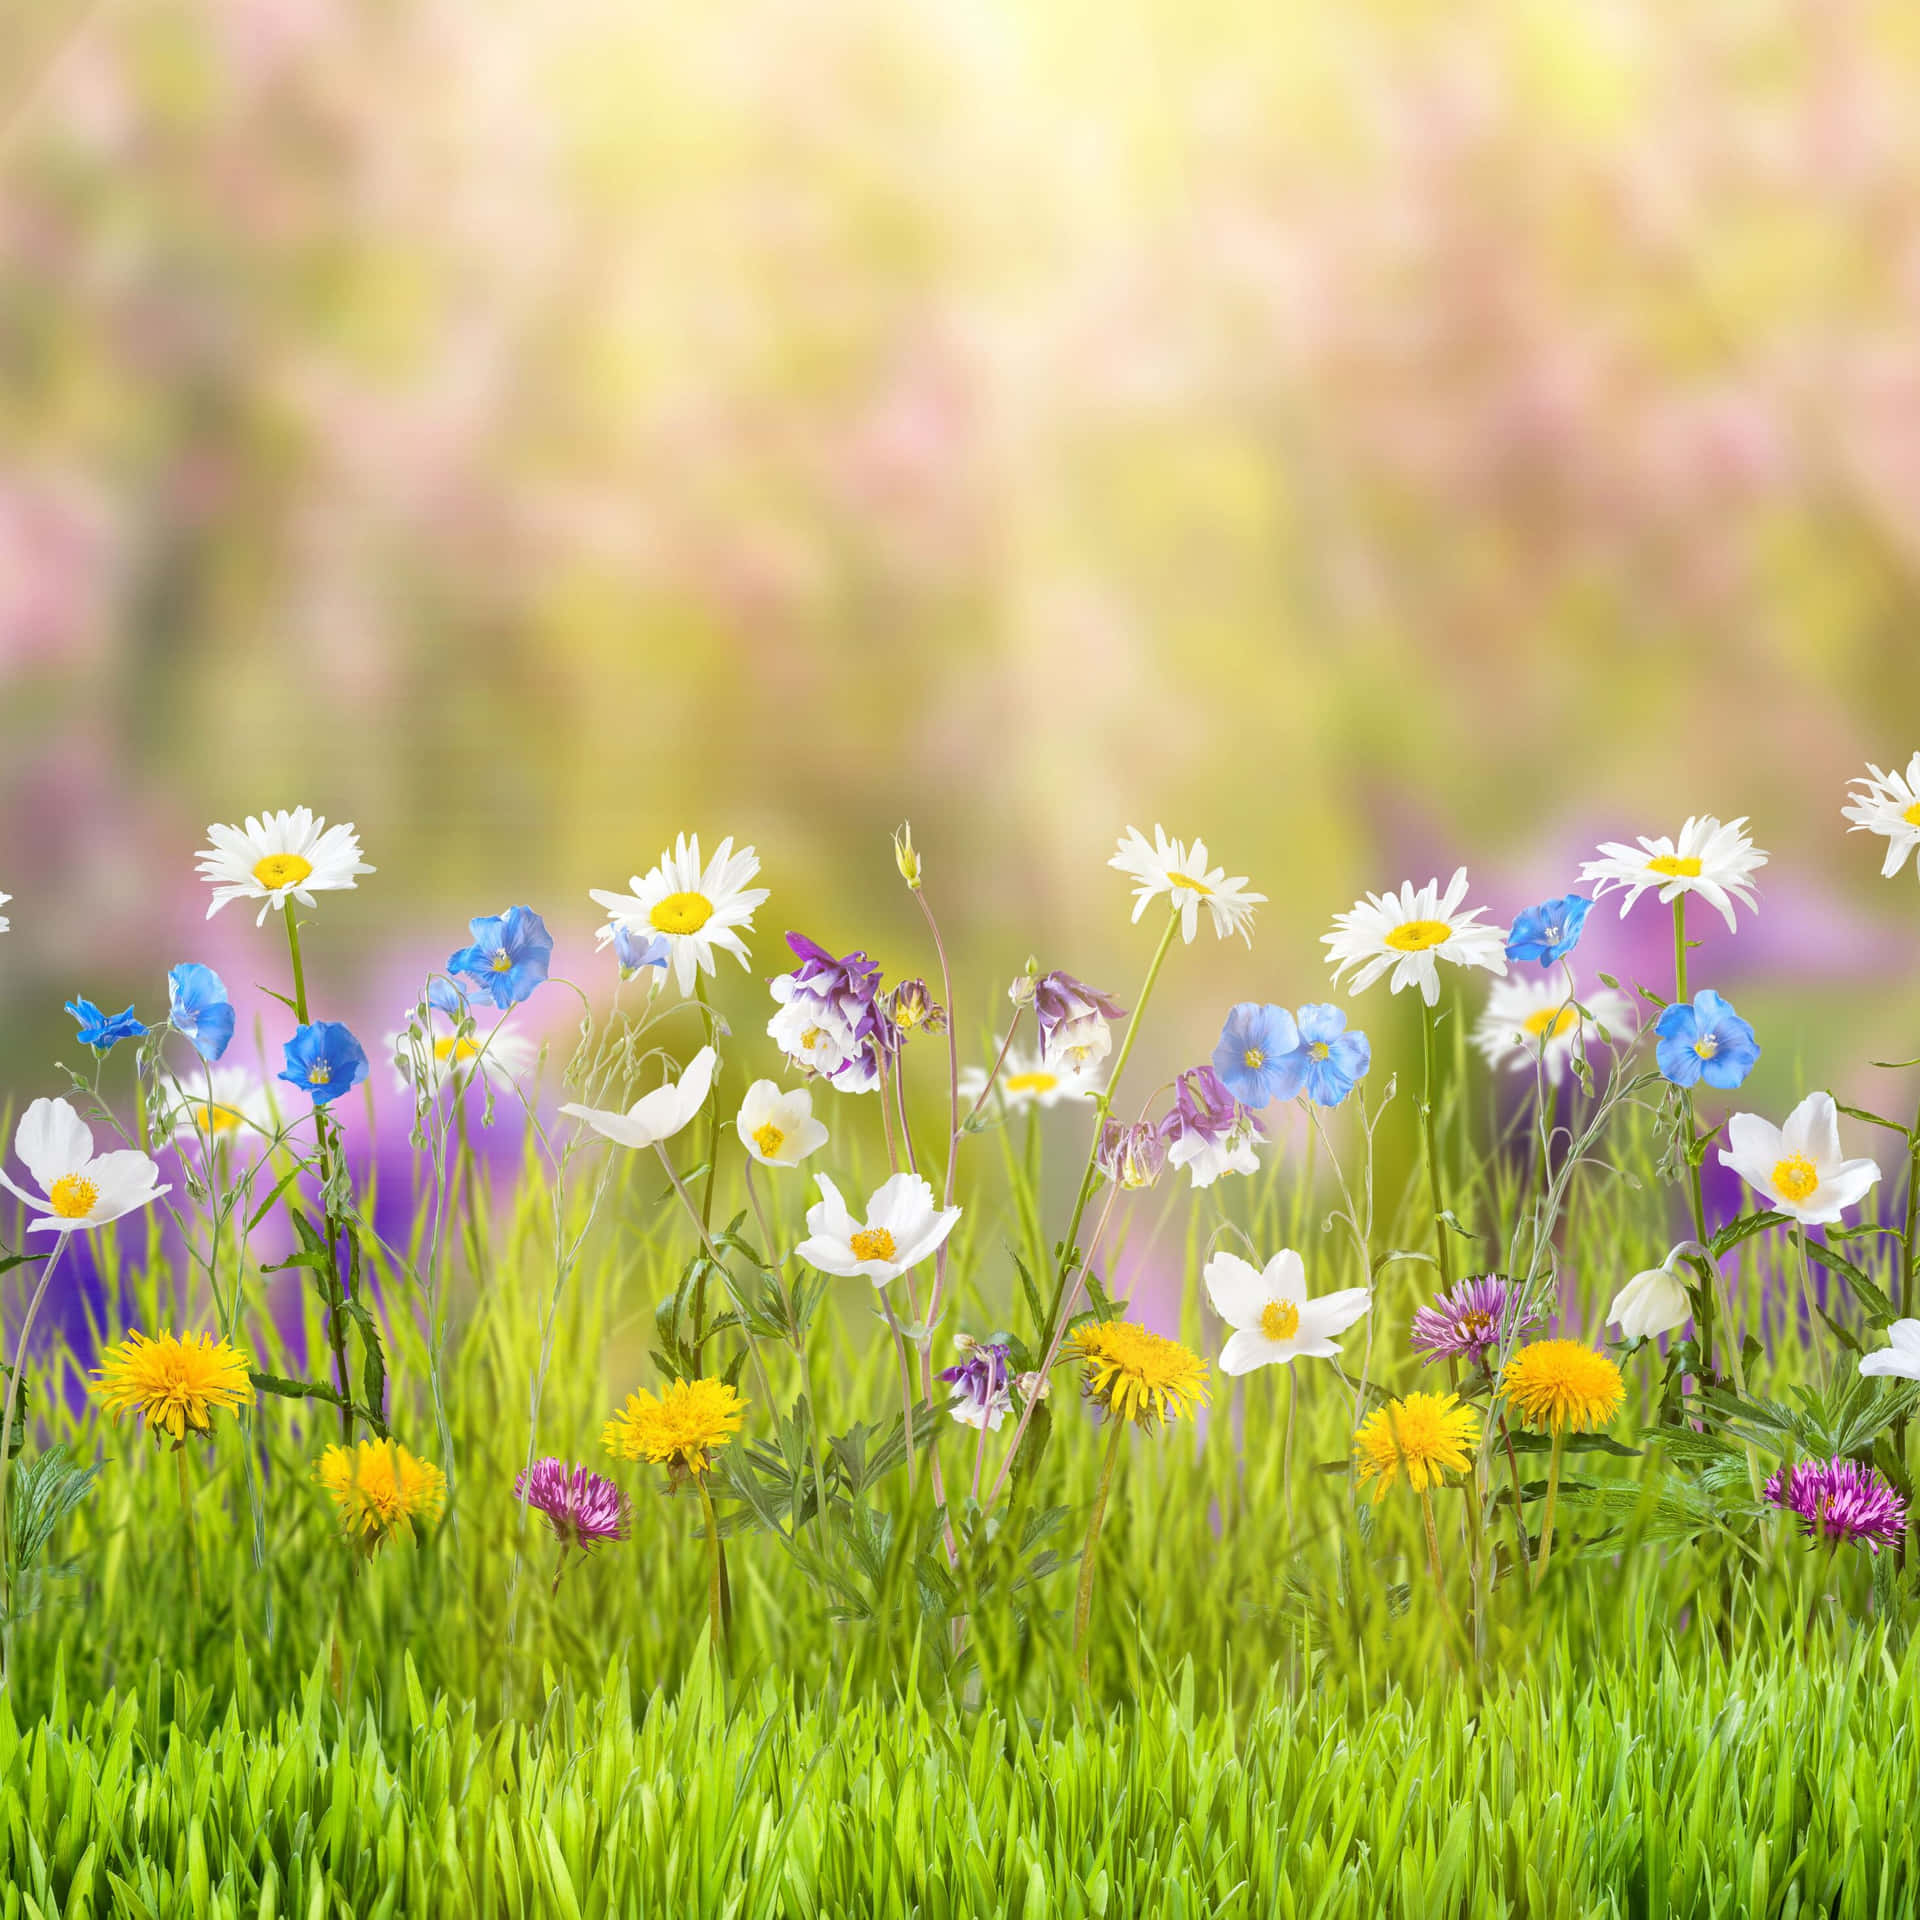 Enjoy the Beautiful Bloom of Spring with an iPad! Wallpaper